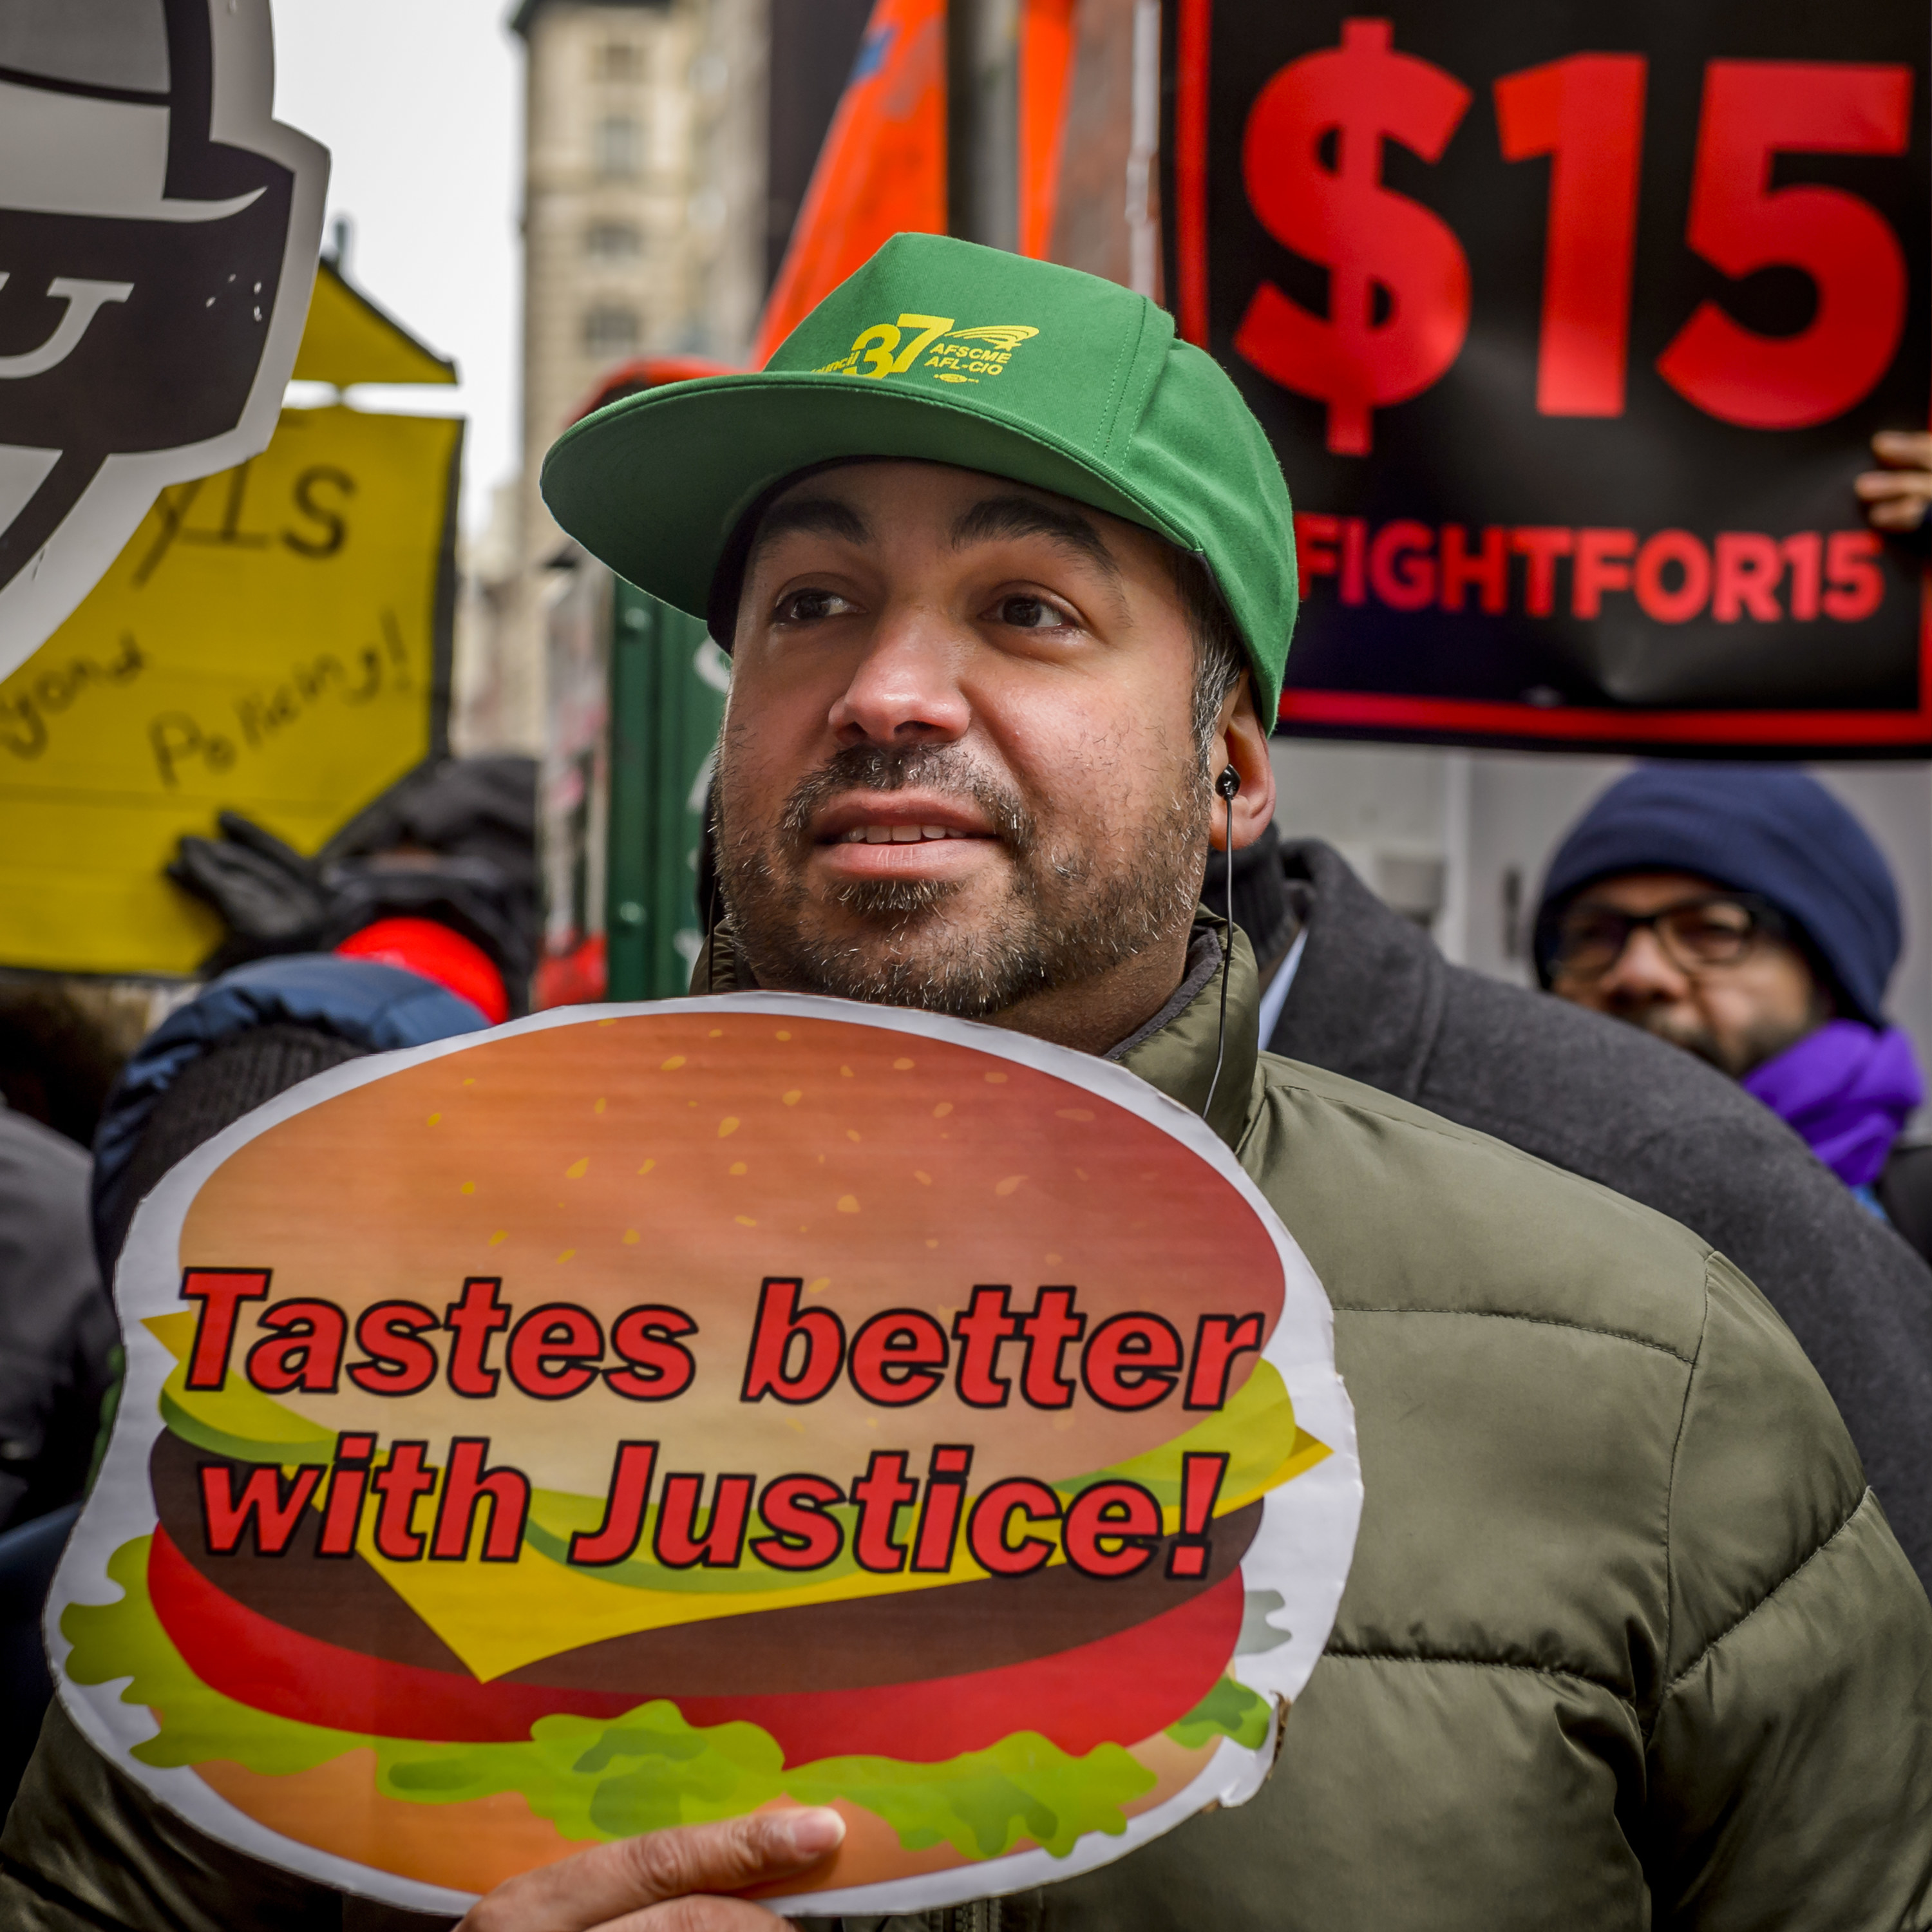 Man at a rally for raising the minimum wage holding a sign shaped like a burger that says tastes better with justice